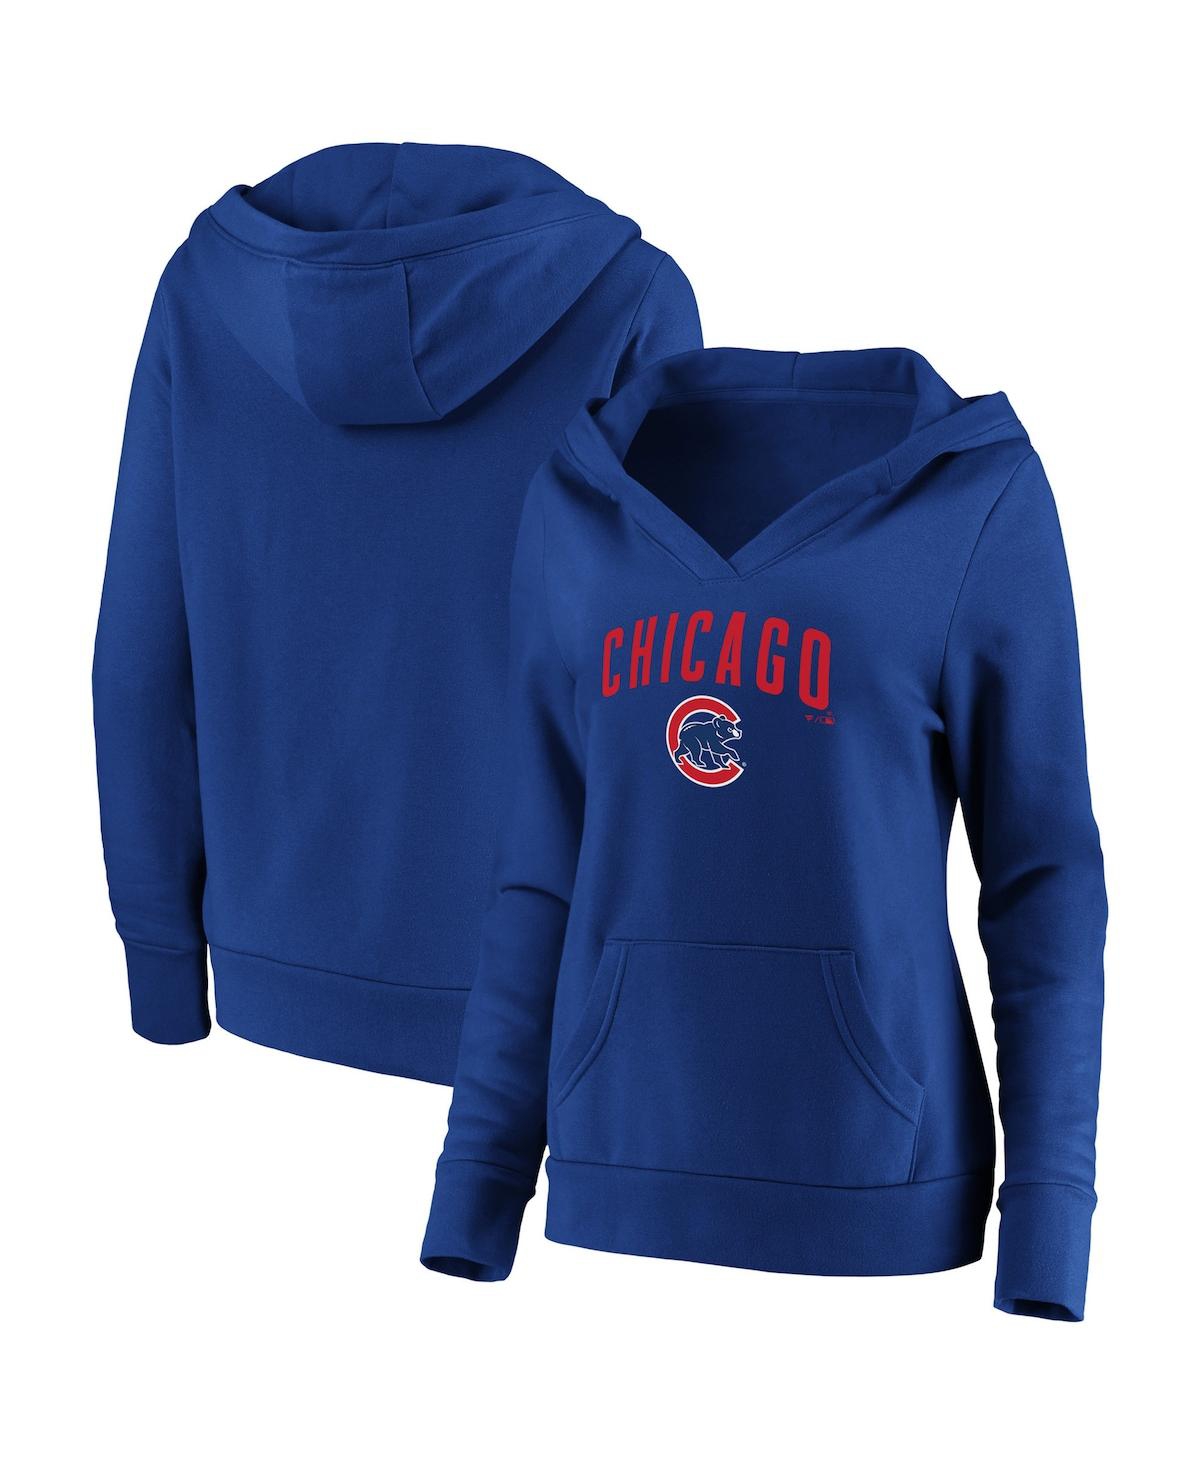 Shop Fanatics Women's  Royal Chicago Cubs Core Team Lockup V-neck Pullover Hoodie